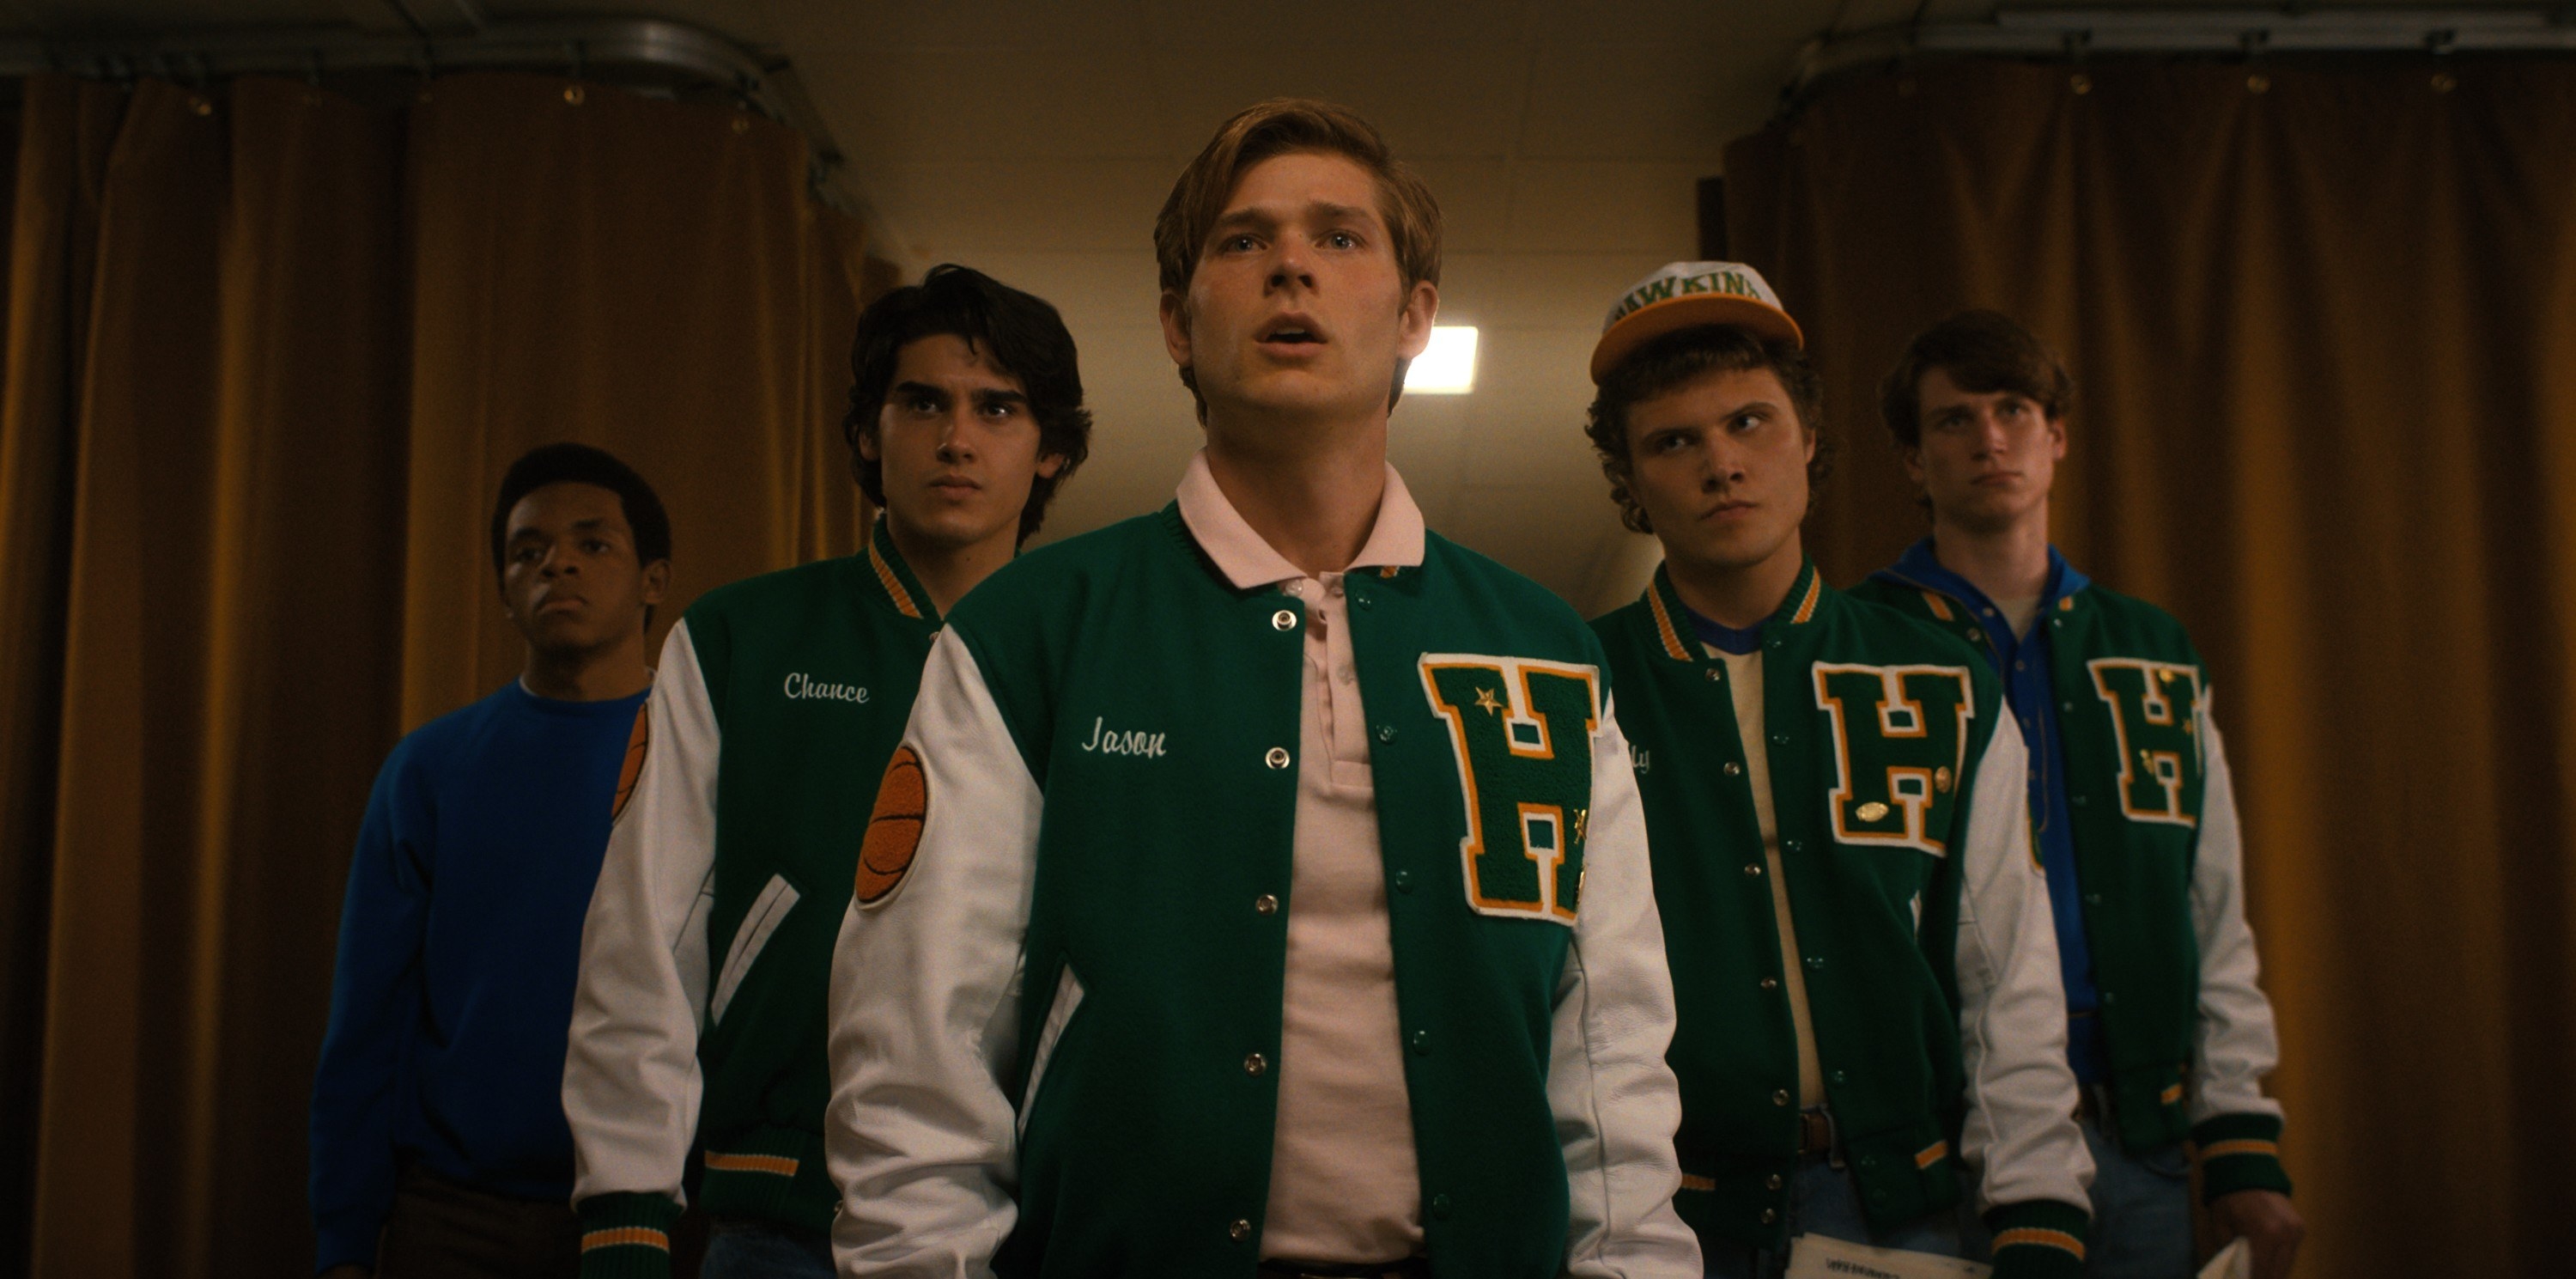 group of teen boys wearing matching letterman jackets